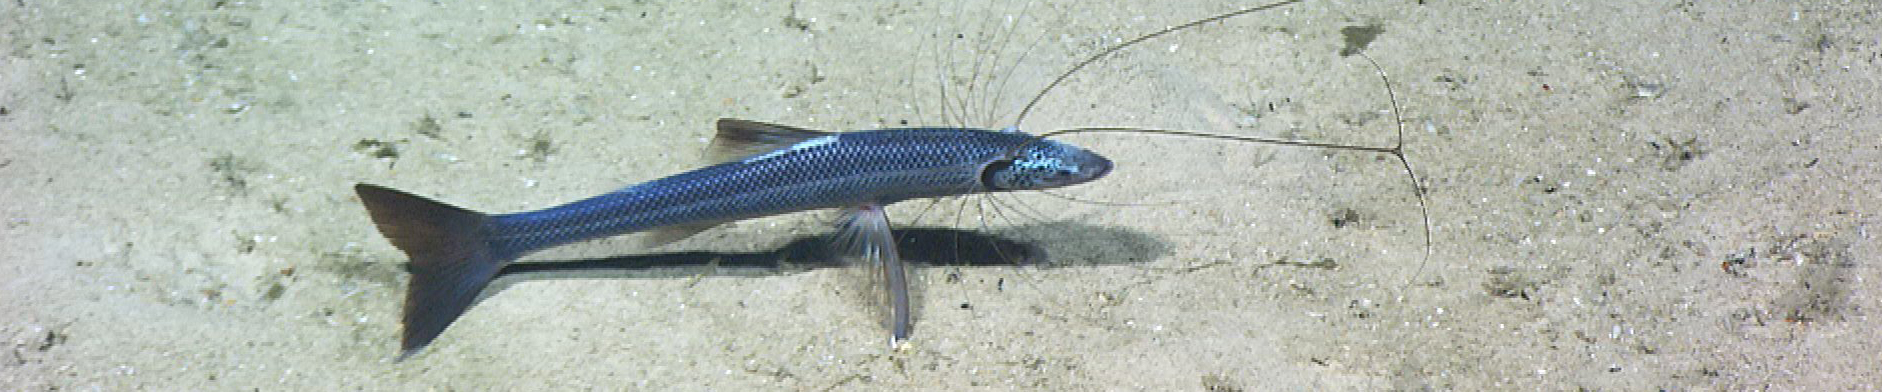 Deepwater tripodfishes, Spiderfishes banner